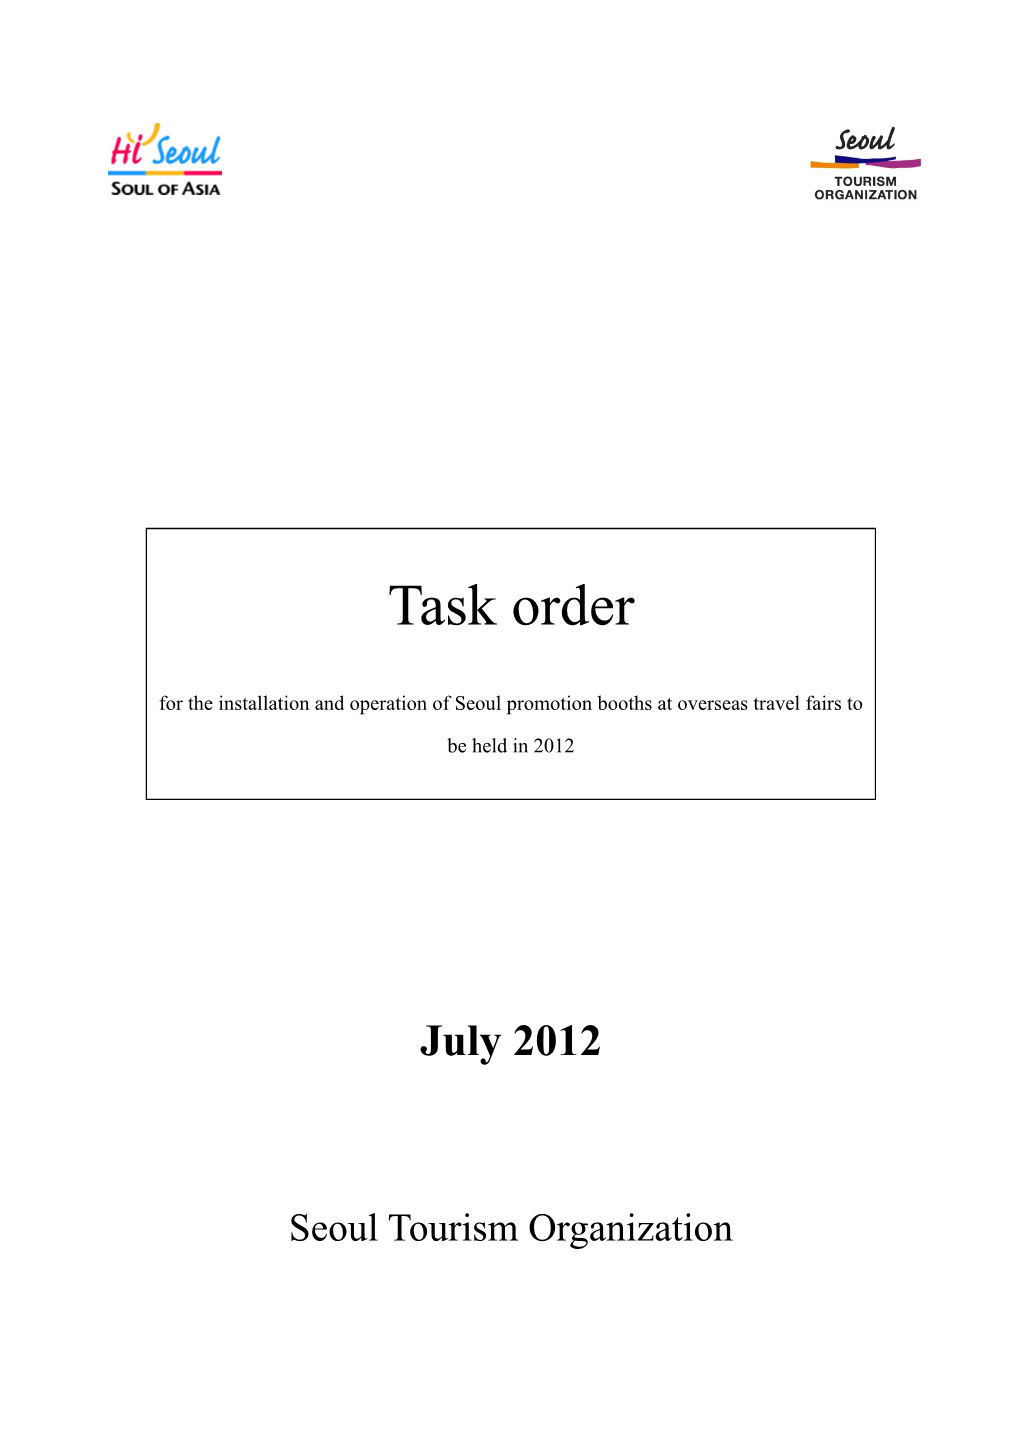 A. Task Title: Installation of Seoul Promotion Booths at Overseas Travel Fairs to Be Held